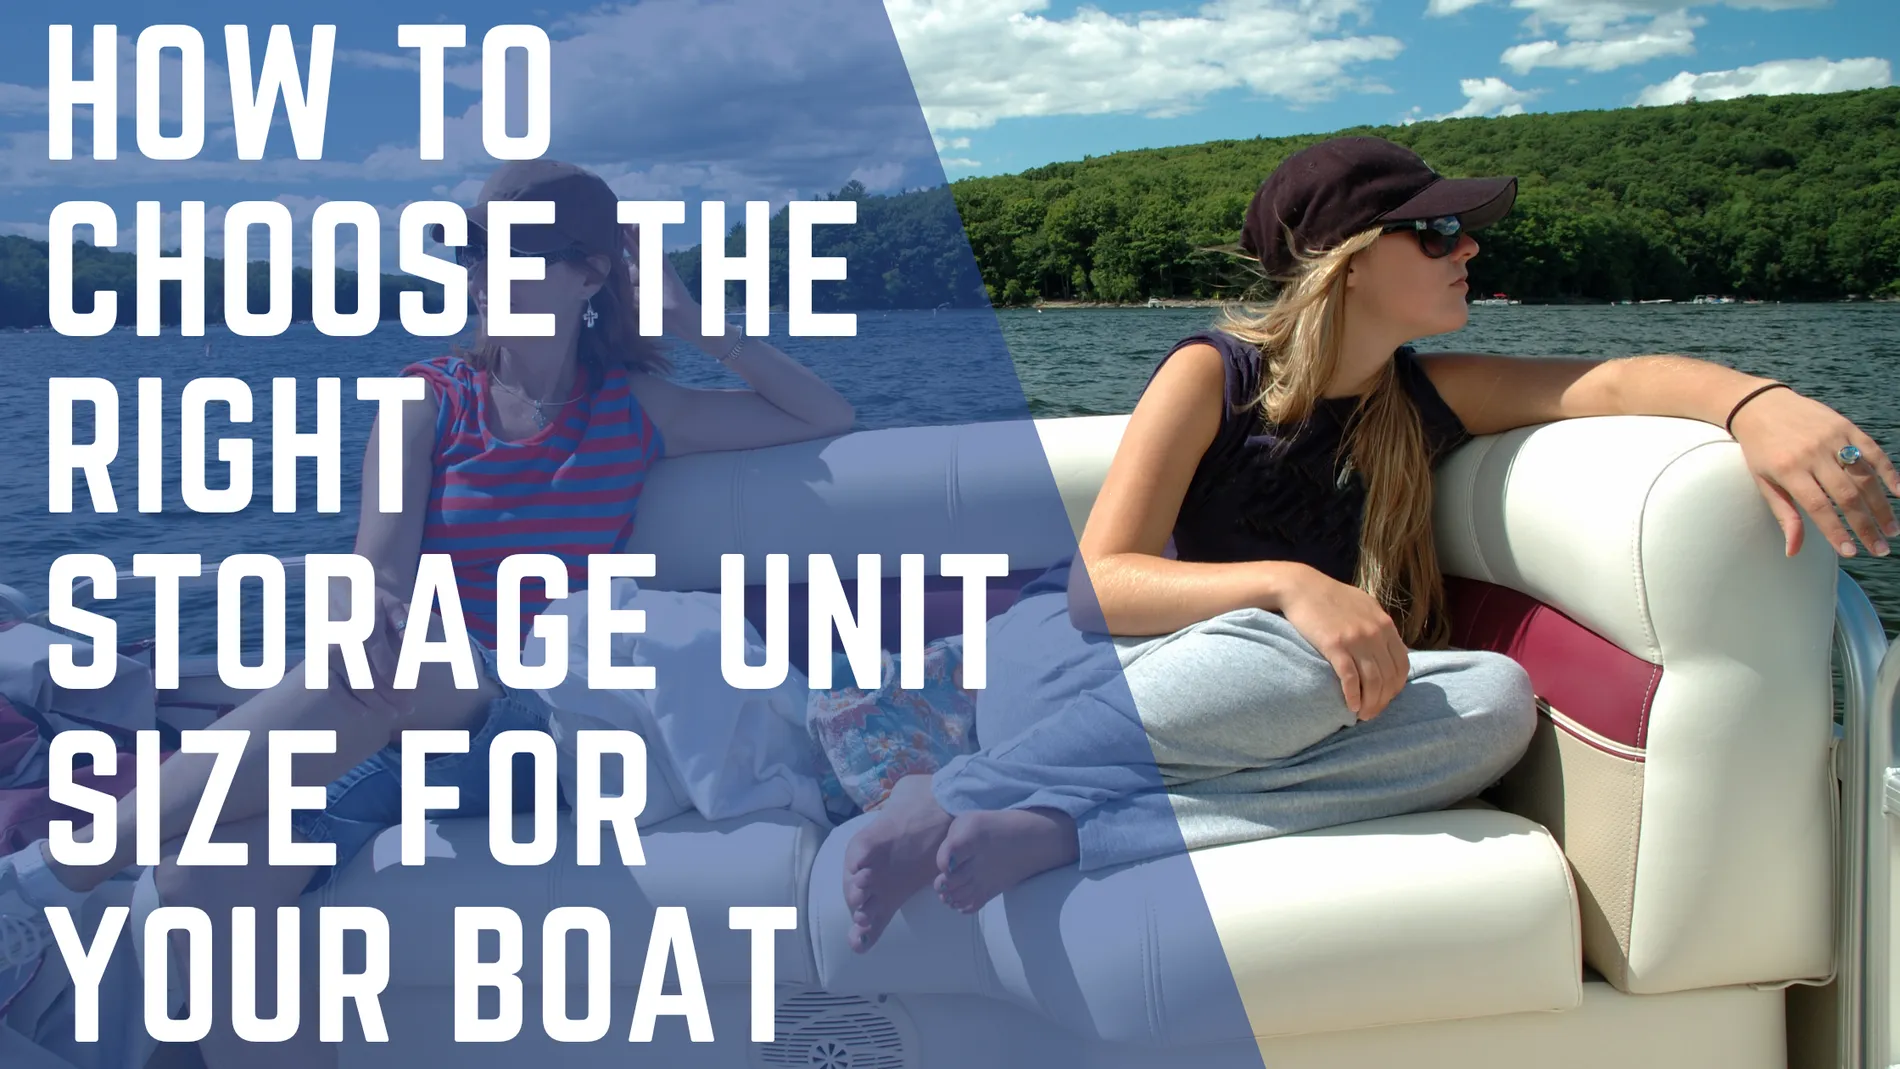 How to choose the right storage unit size for your boat